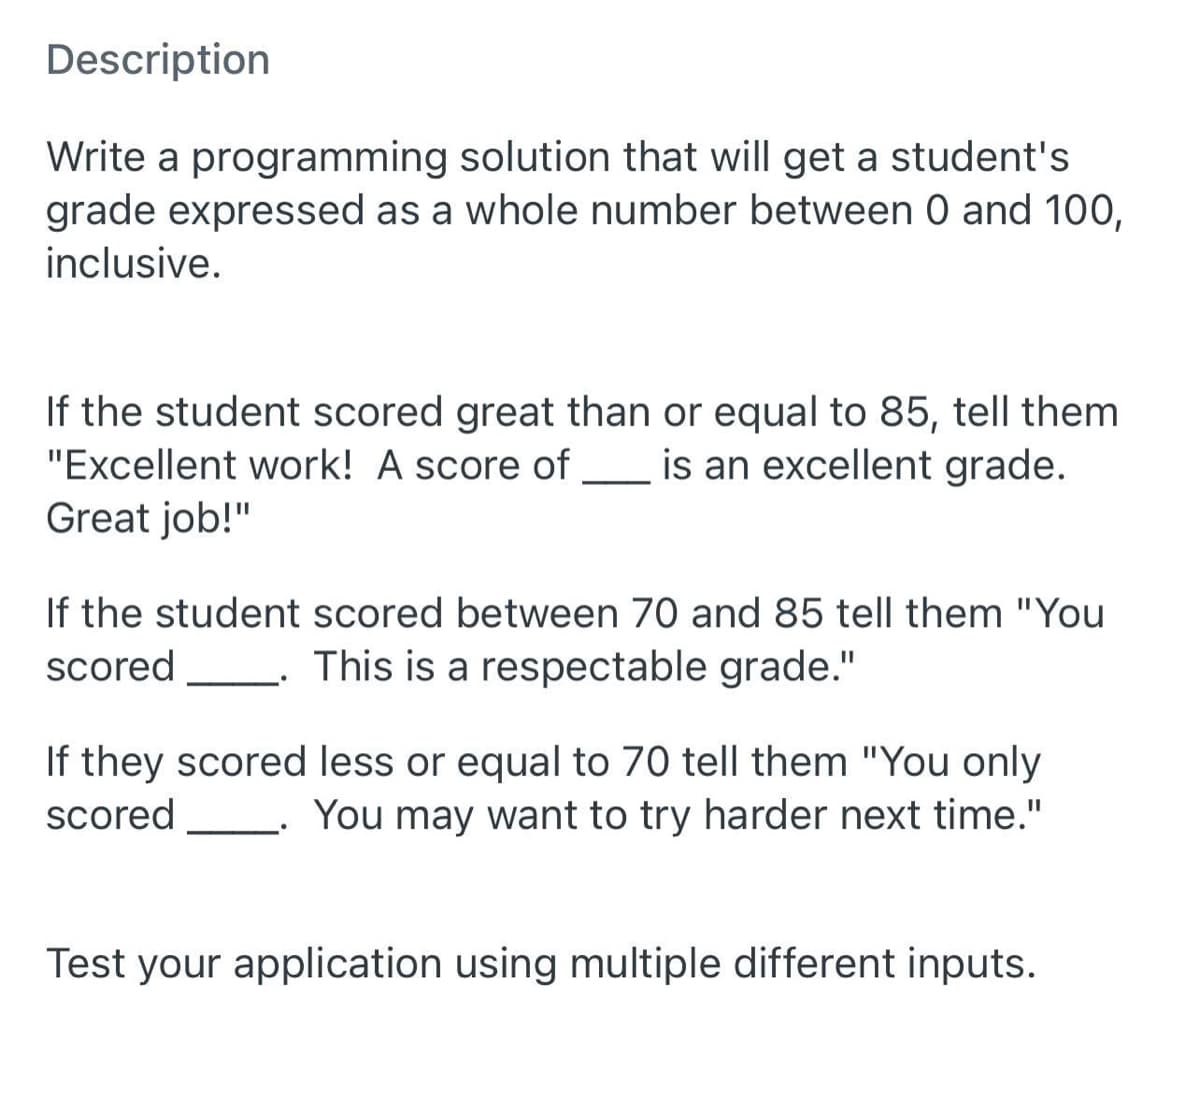 Description
Write a programming solution that will get a student's
grade expressed as a whole number between 0 and 100,
inclusive.
If the student scored great than or equal to 85, tell them
"Excellent work! A score of _ is an excellent grade.
Great job!"
If the student scored between 70 and 85 tell them "You
This is a respectable grade."
scored
If they scored less or equal to 70 tell them "You only
You may want to try harder next time."
scored
Test your application using multiple different inputs.
